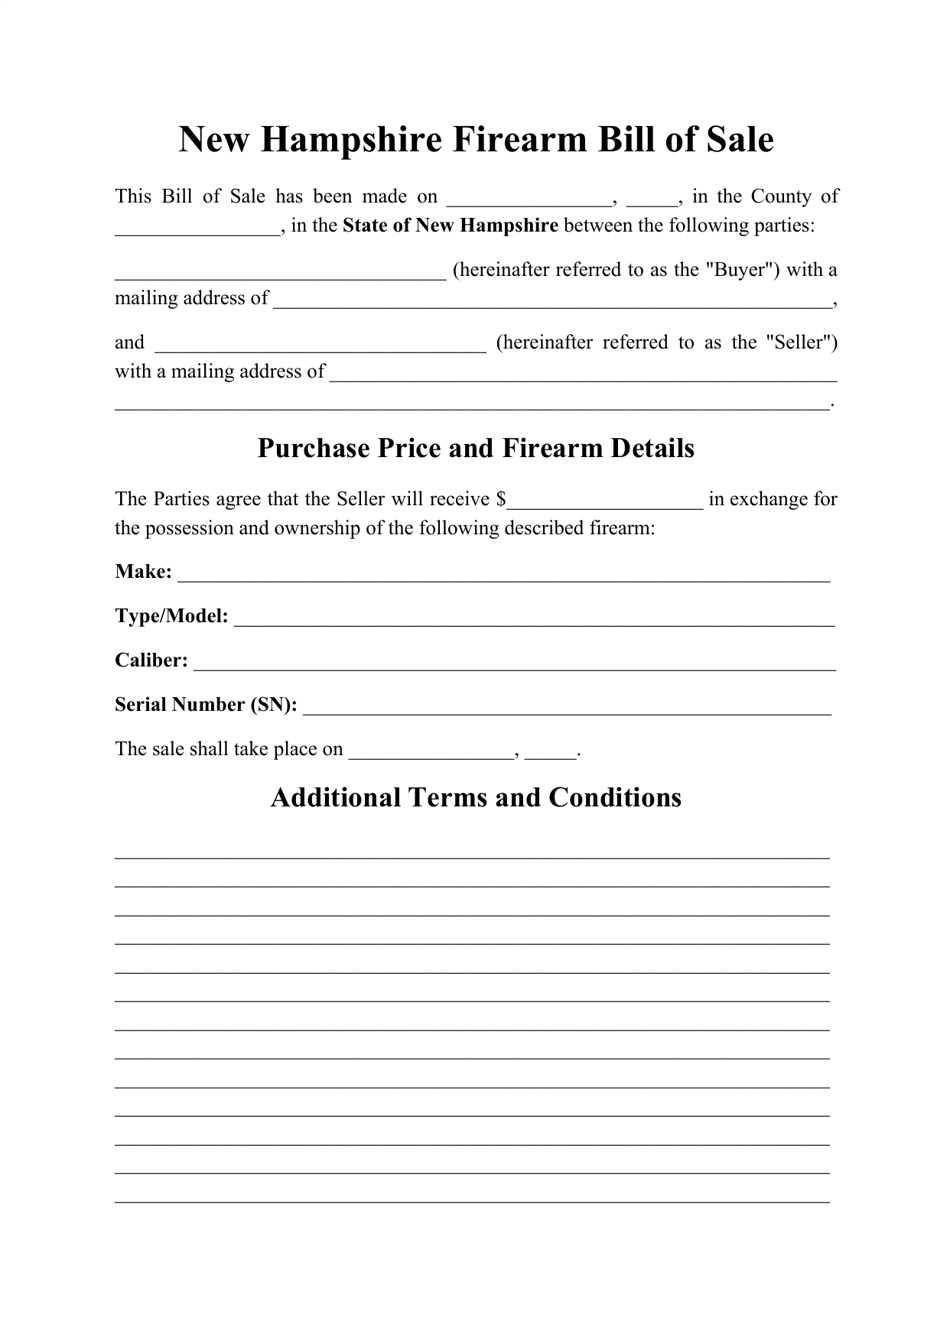 Firearm Bill of Sale Form - New Hampshire, Page 1